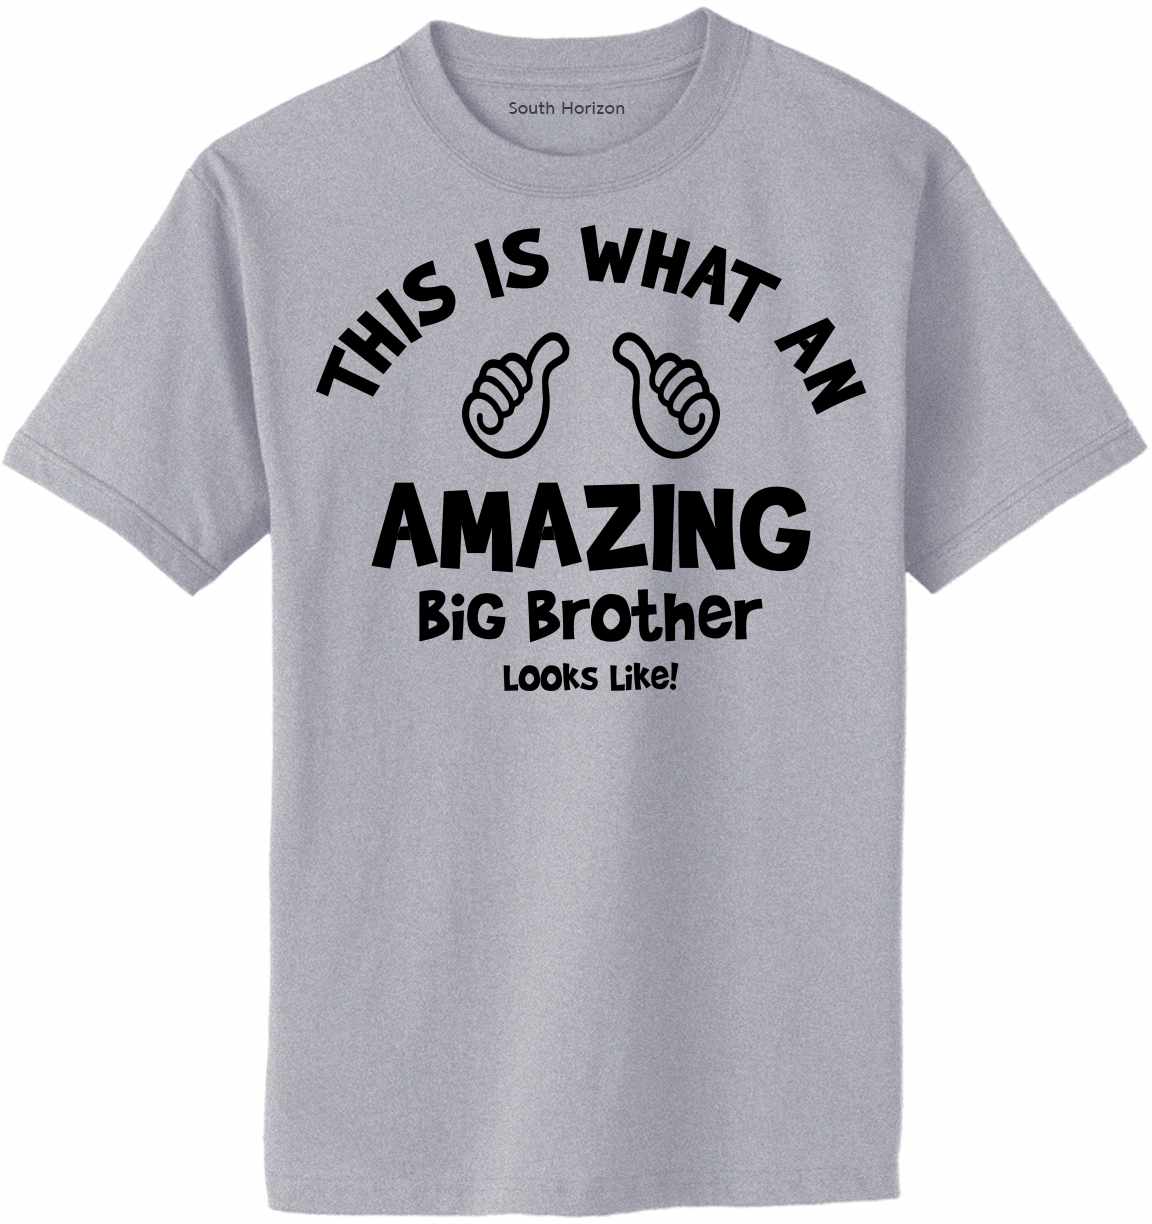 This is What an AMAZING Big Brother Looks Like Adult T-Shirt (#1115-1)